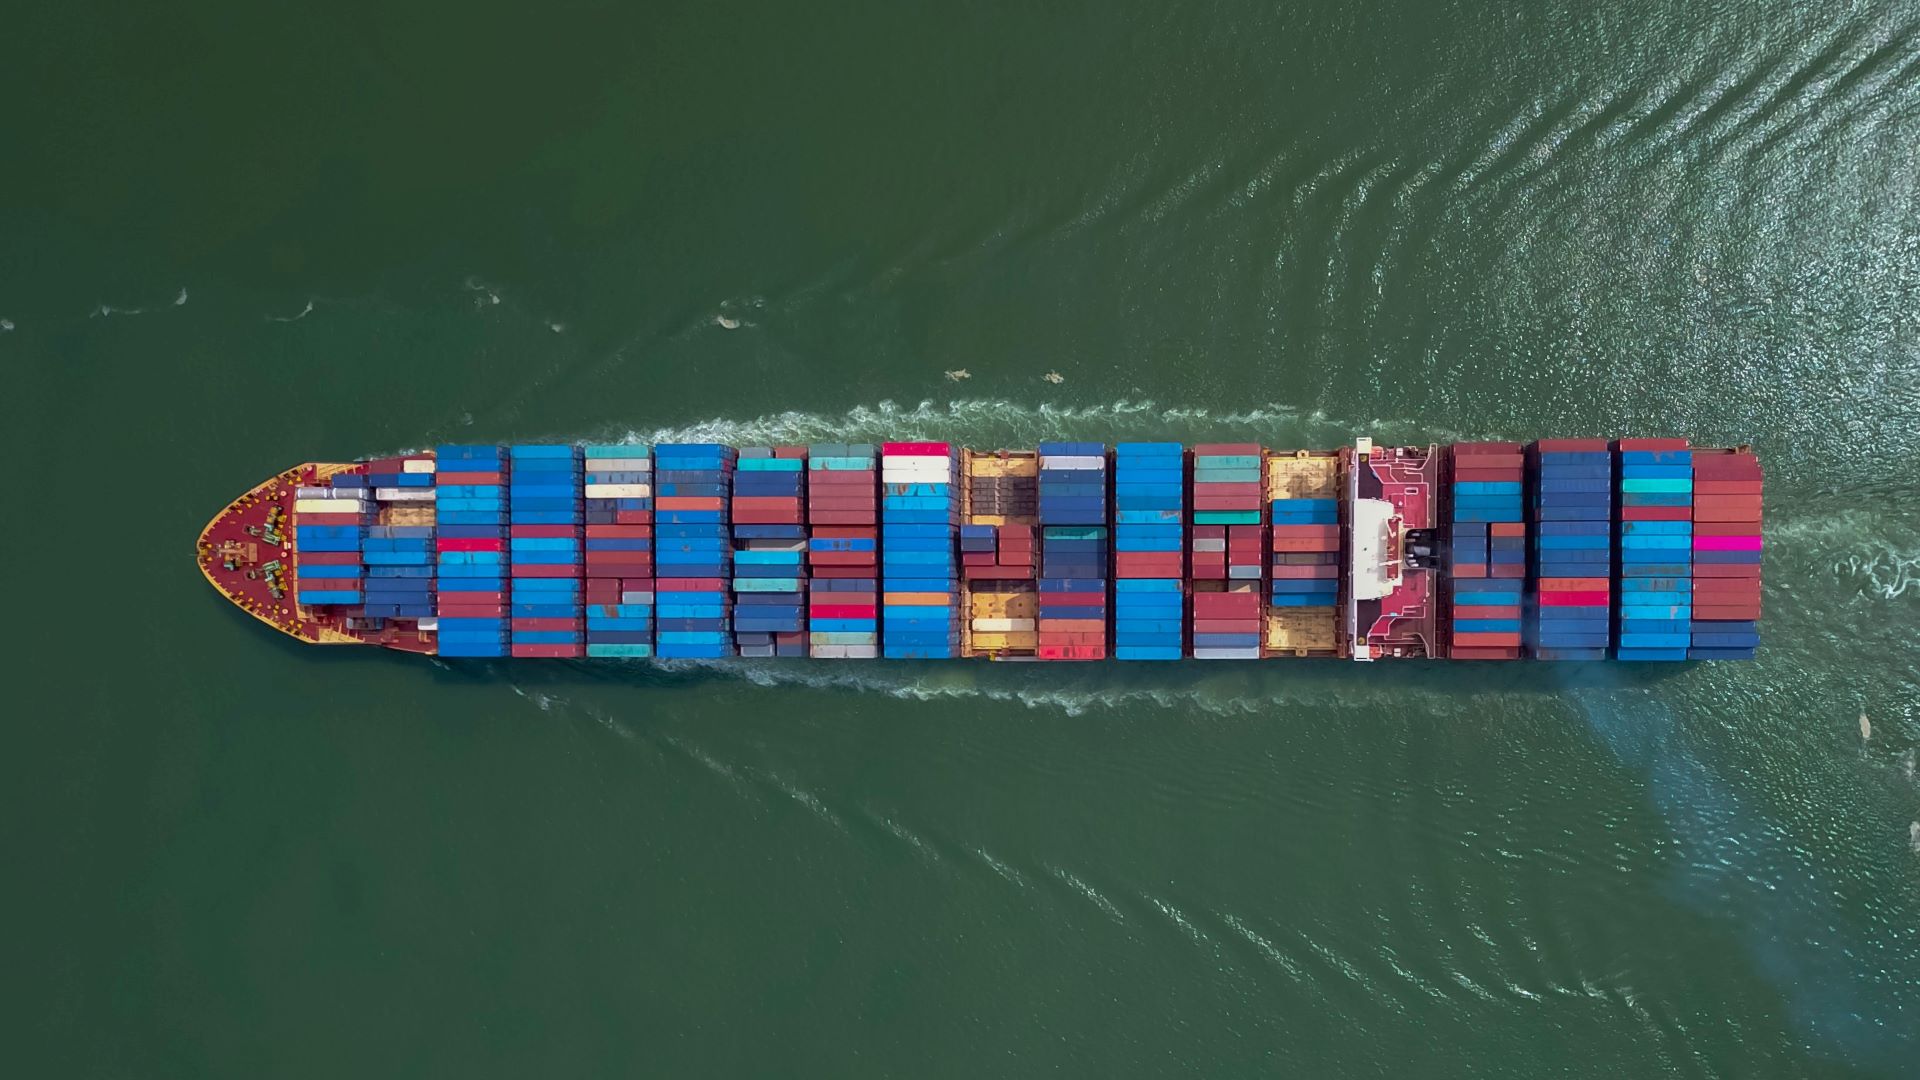 Overhead view of container ship